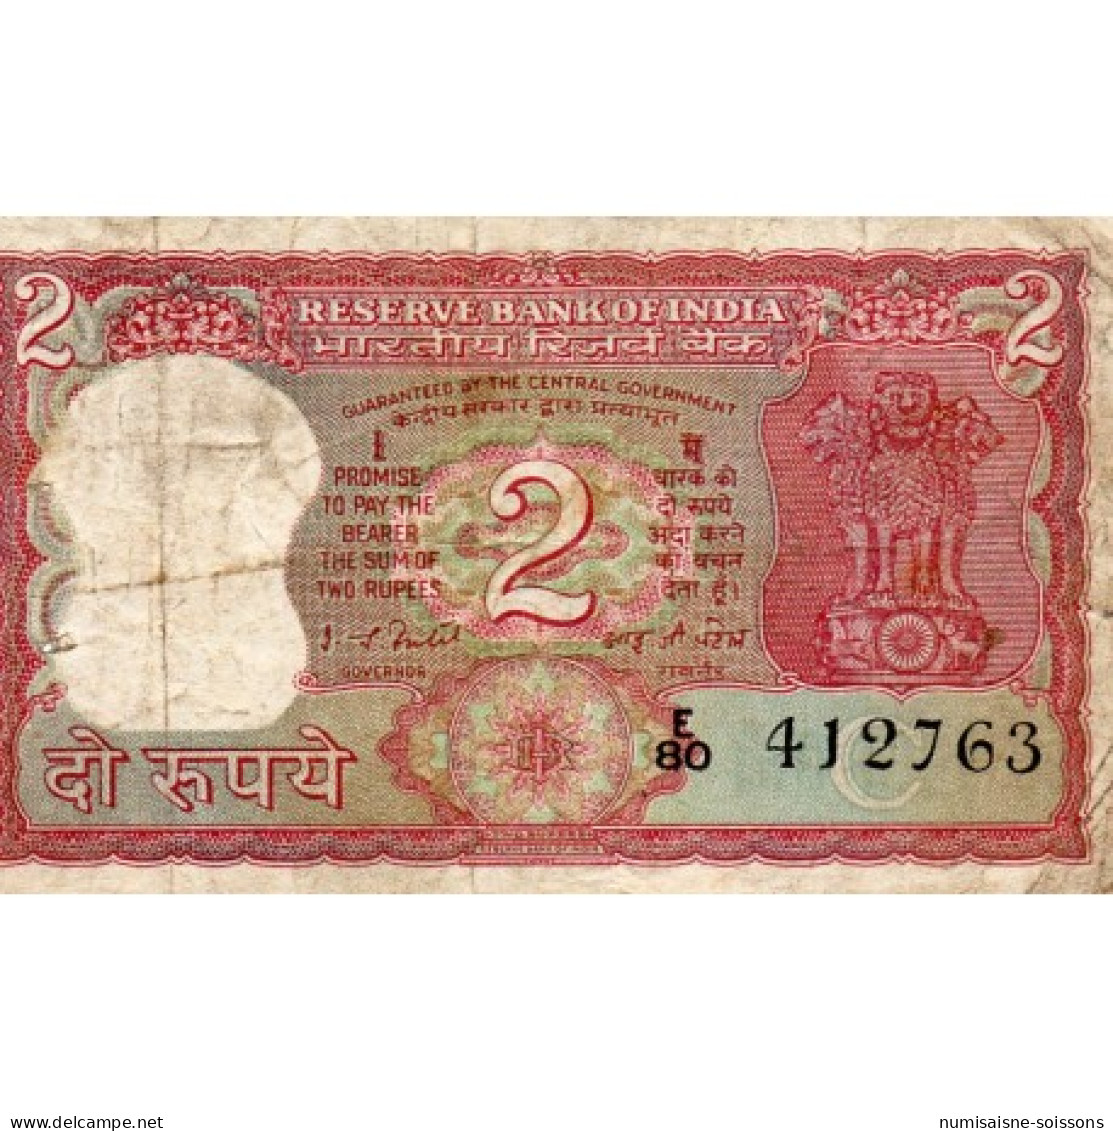 INDE - PICK 53 F - 2 RUPEES - NON DATE - SIGN 82 - LETTRE E - TB - Inde